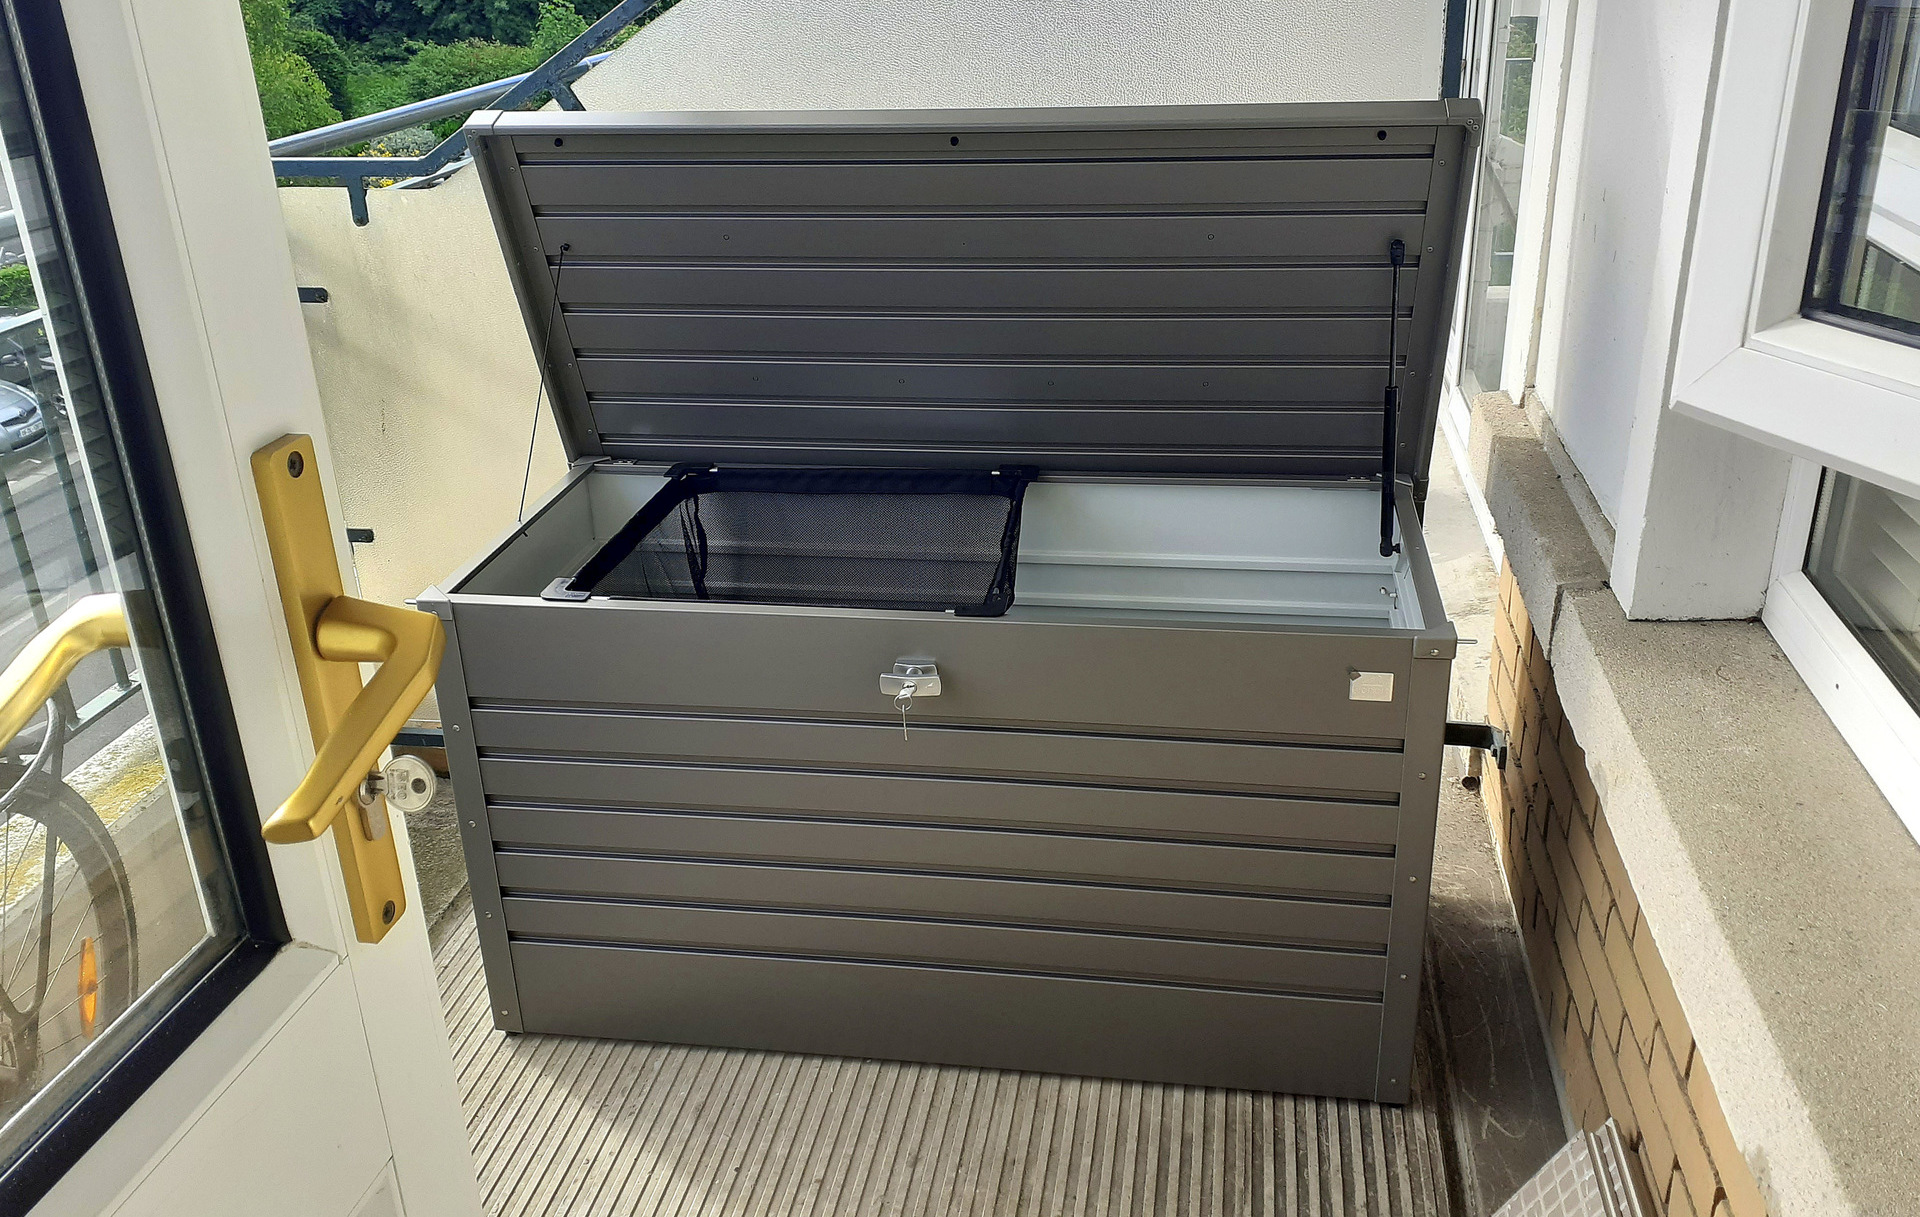 The Biohort LeisureTime Storage Box Size 180 in metallic quartz grey  | installed on an Apartment Balcony, in Booterstown, Co Dublin | ON SALE with FREE Installation,  Tel 087-2306 128